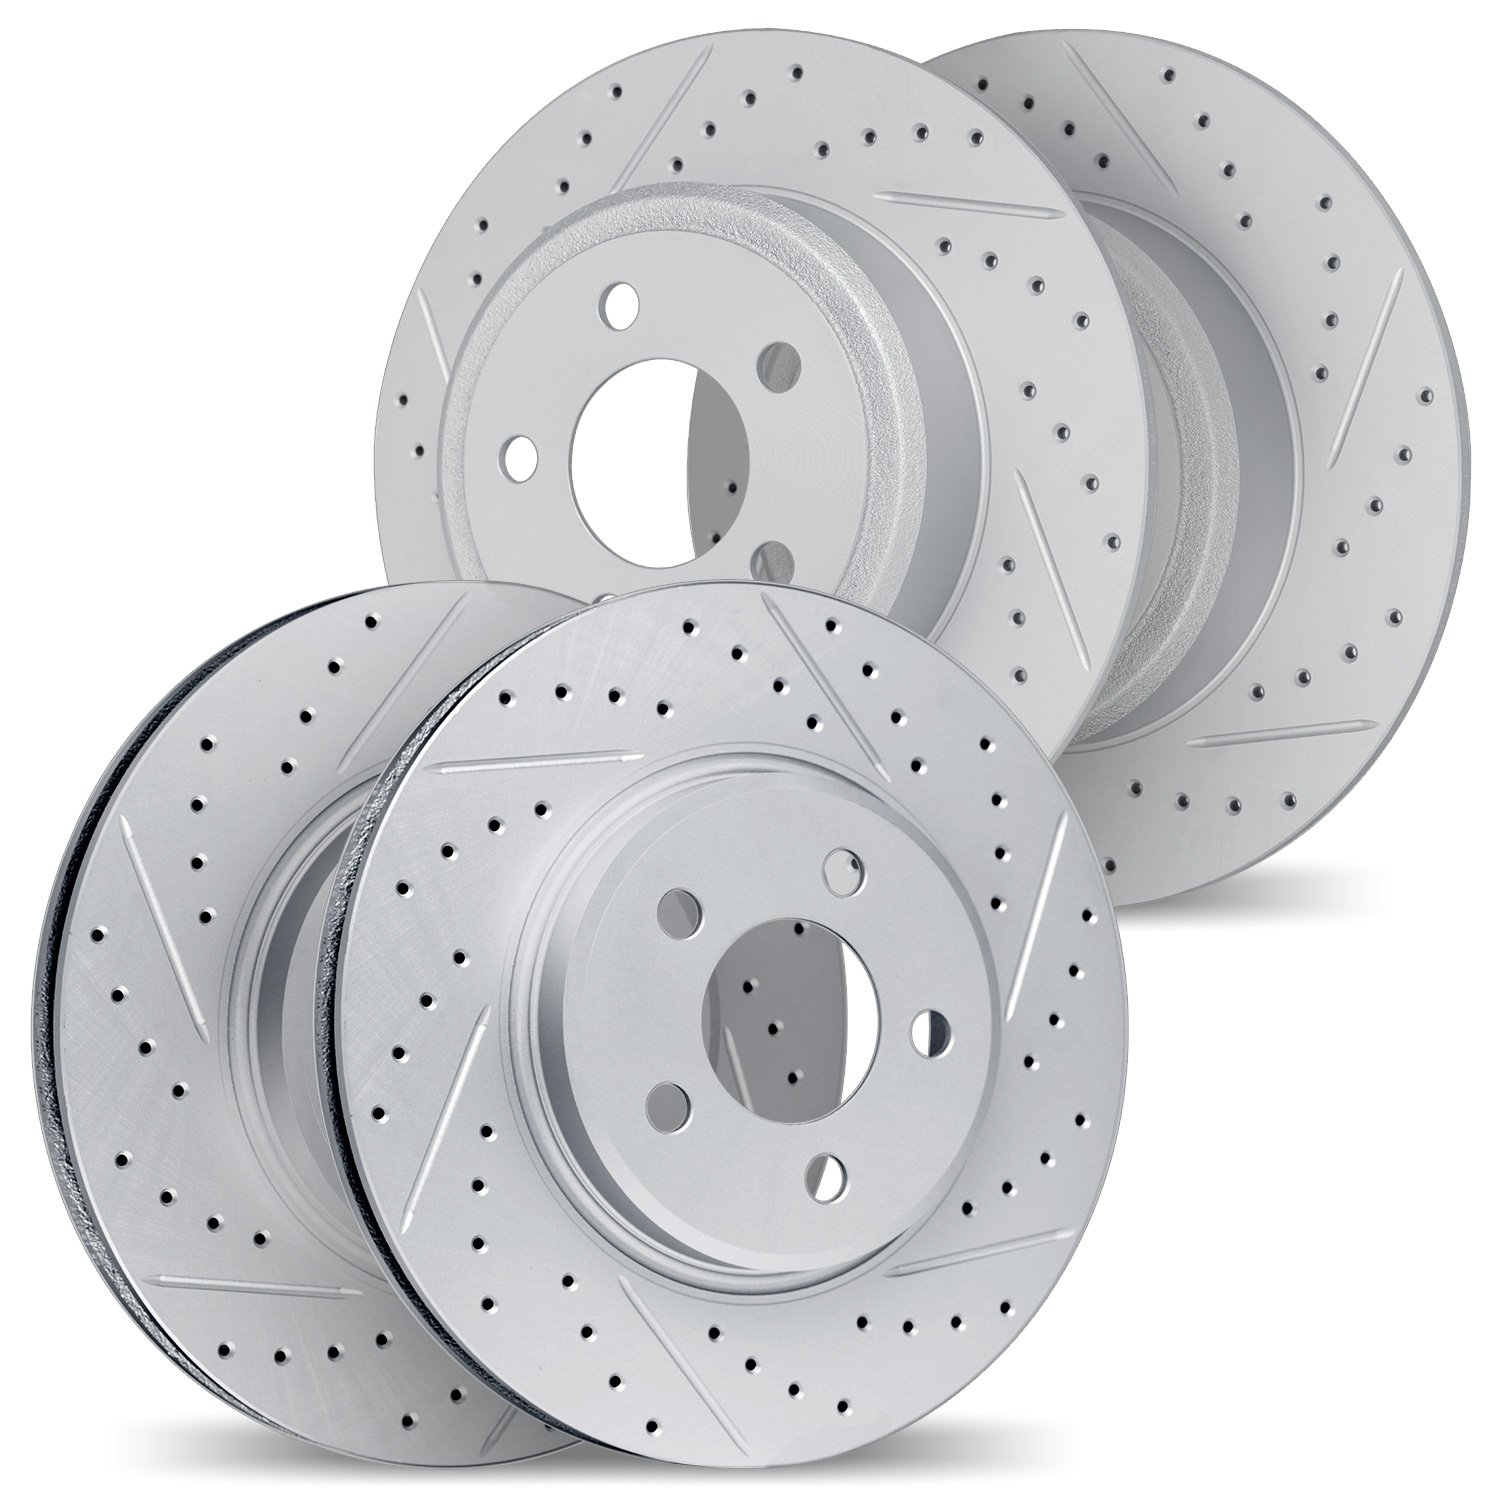 2004-75023 Geoperformance Drilled/Slotted Brake Rotors, 2015-2021 Lexus/Toyota/Scion, Position: Front and Rear